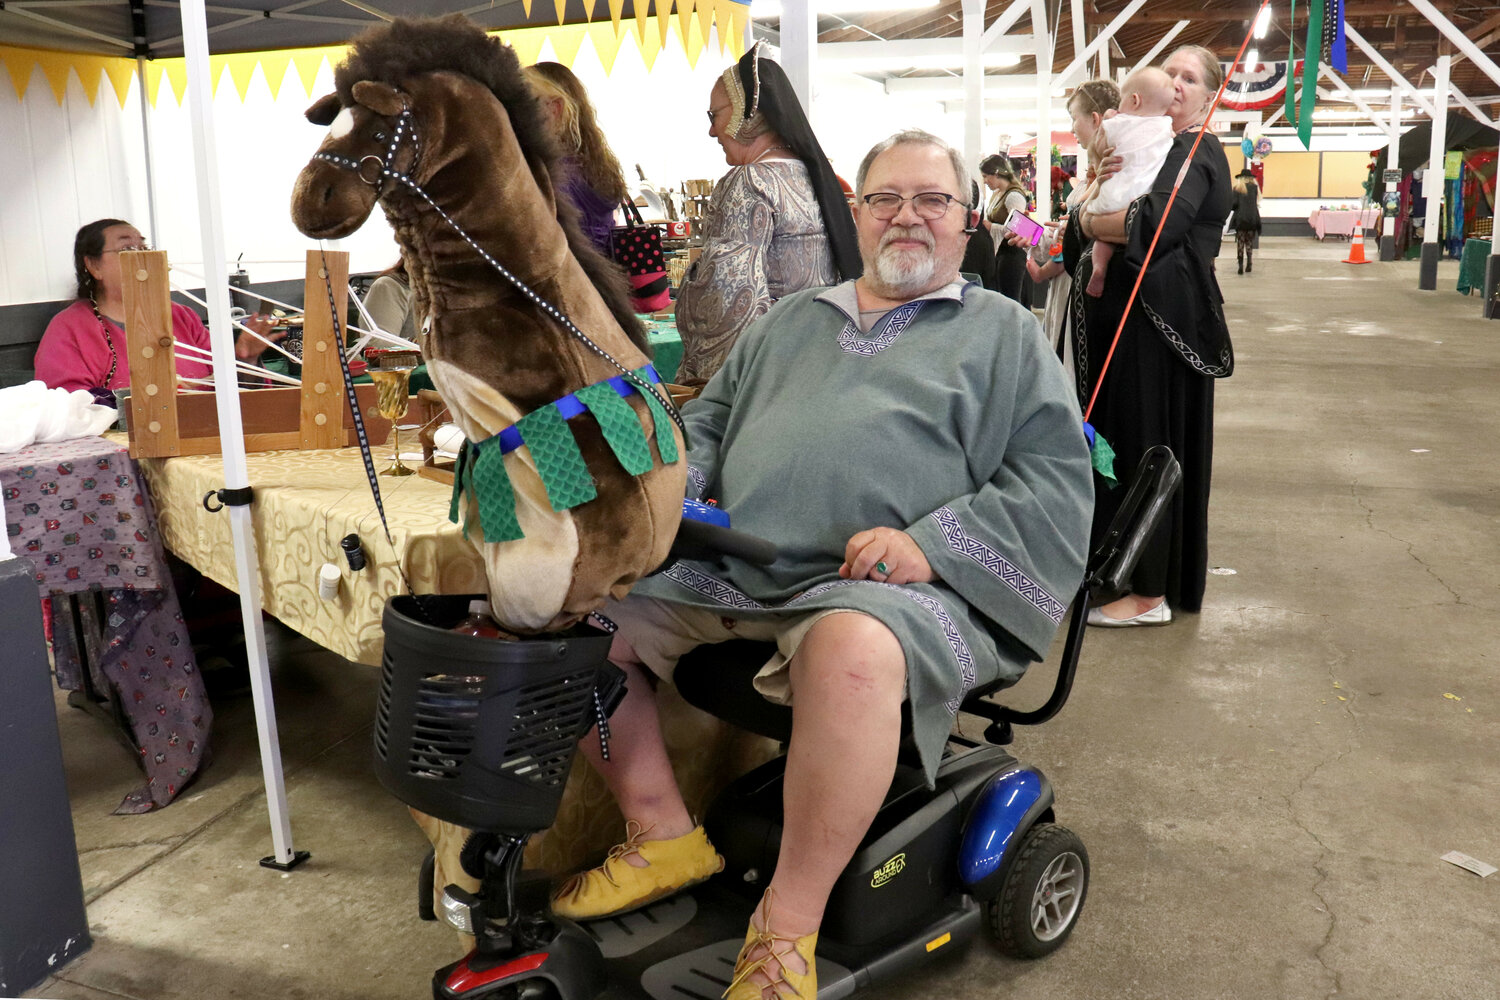 Live-action roleplayer “Tedious The Wood Butcher” rides his steed, “Woody the Warhorse,” at the Southwest Washington Fairgrounds in Chehalis during the Centralia Fantasy Festival on Saturday, May 27.